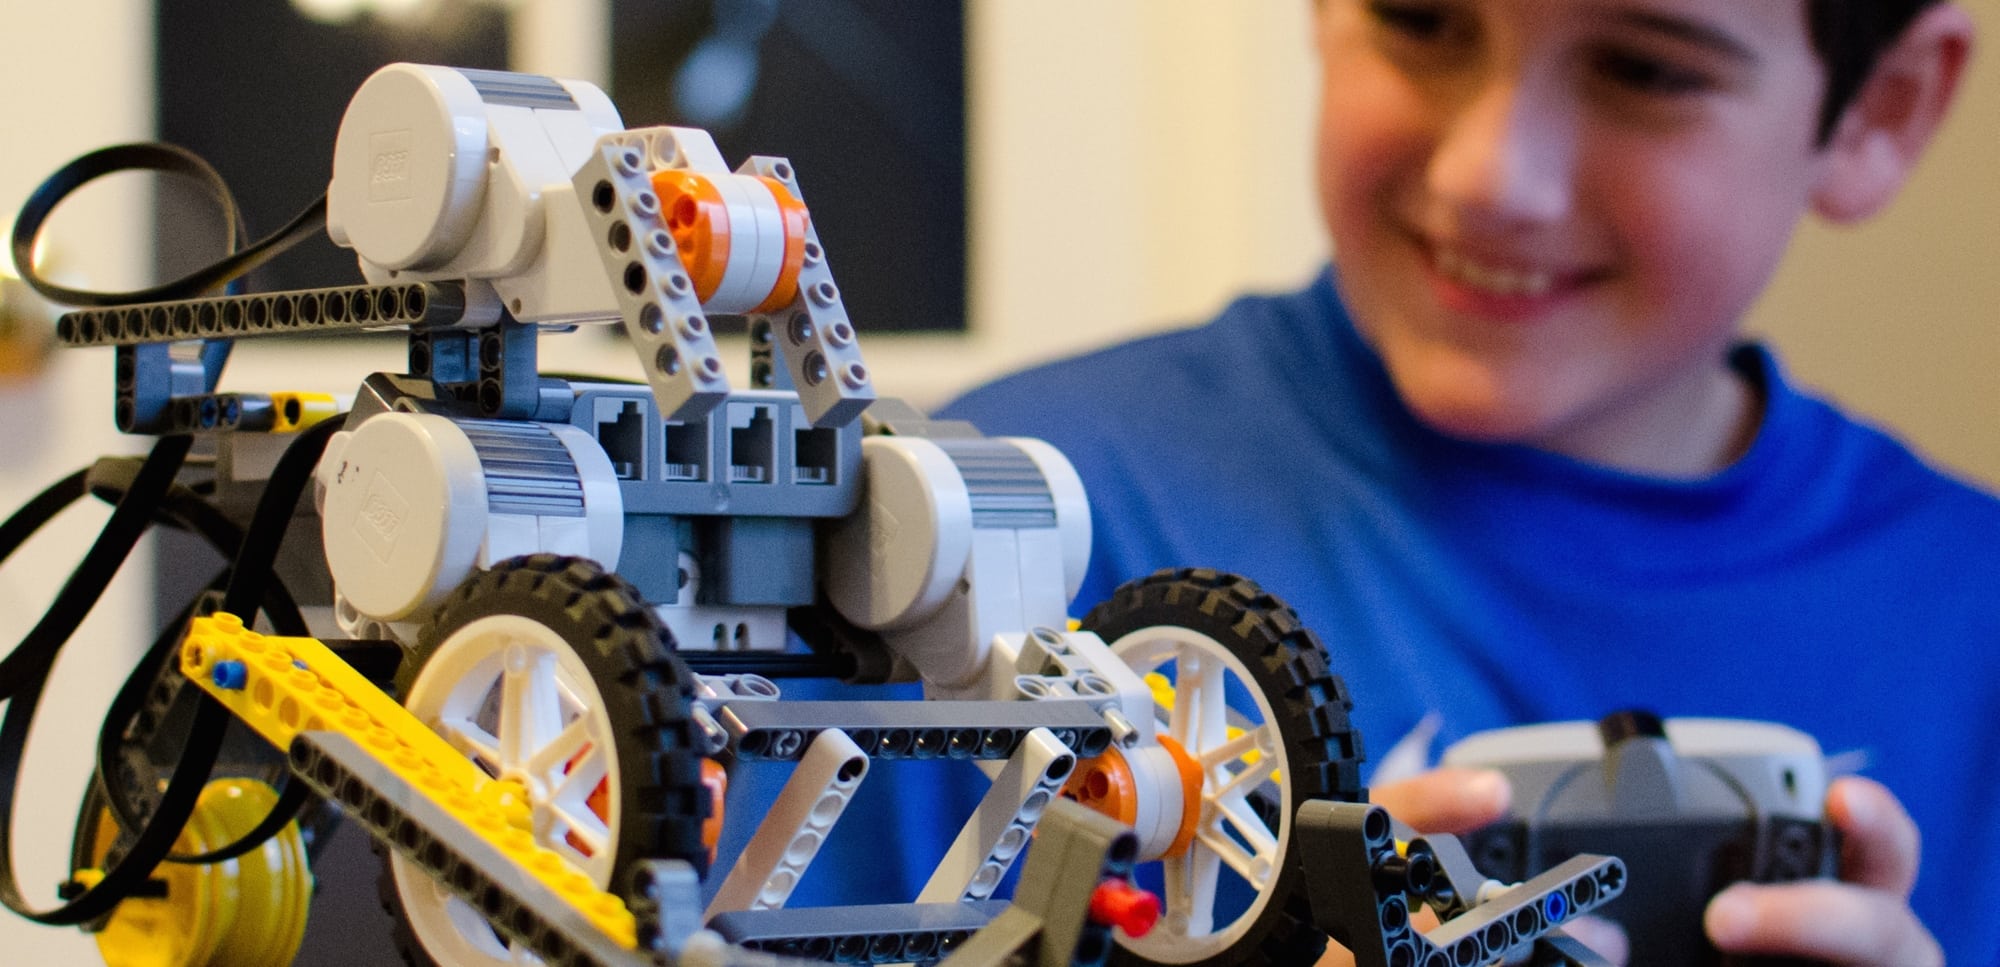 Open Your Own Franchise And Teach Kids About Robotics And Engineering